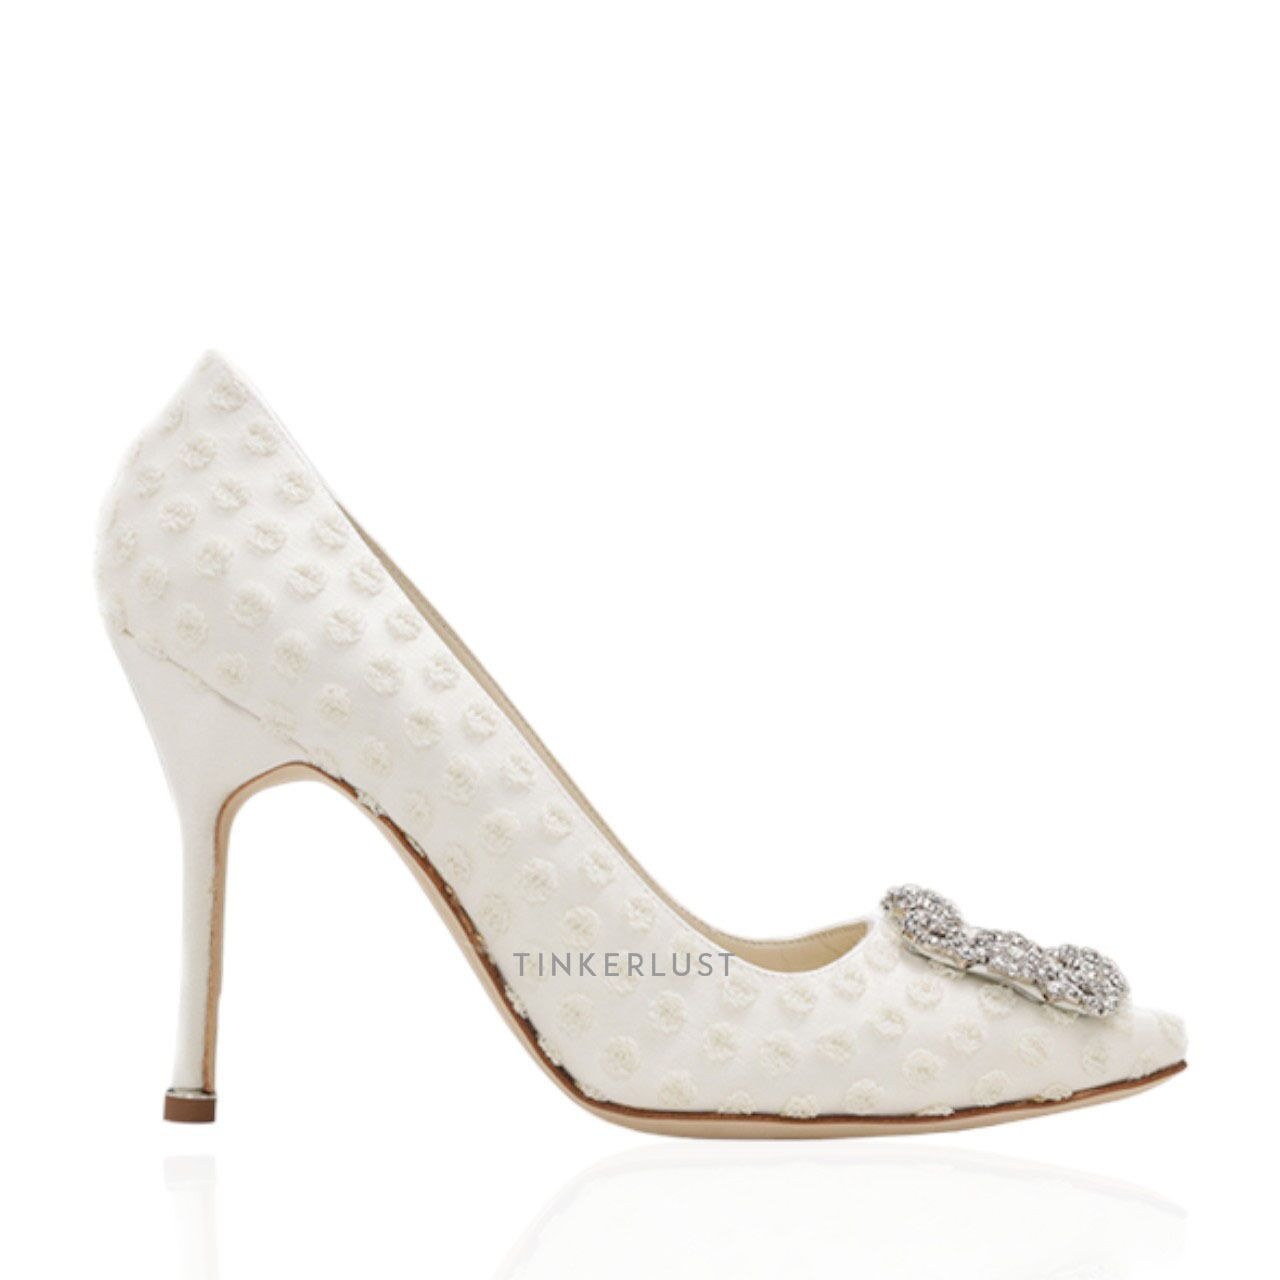 Manolo Blahnik Hangisi Embroidered Pumps 10.5cm in White Satin with White Crystal Heels